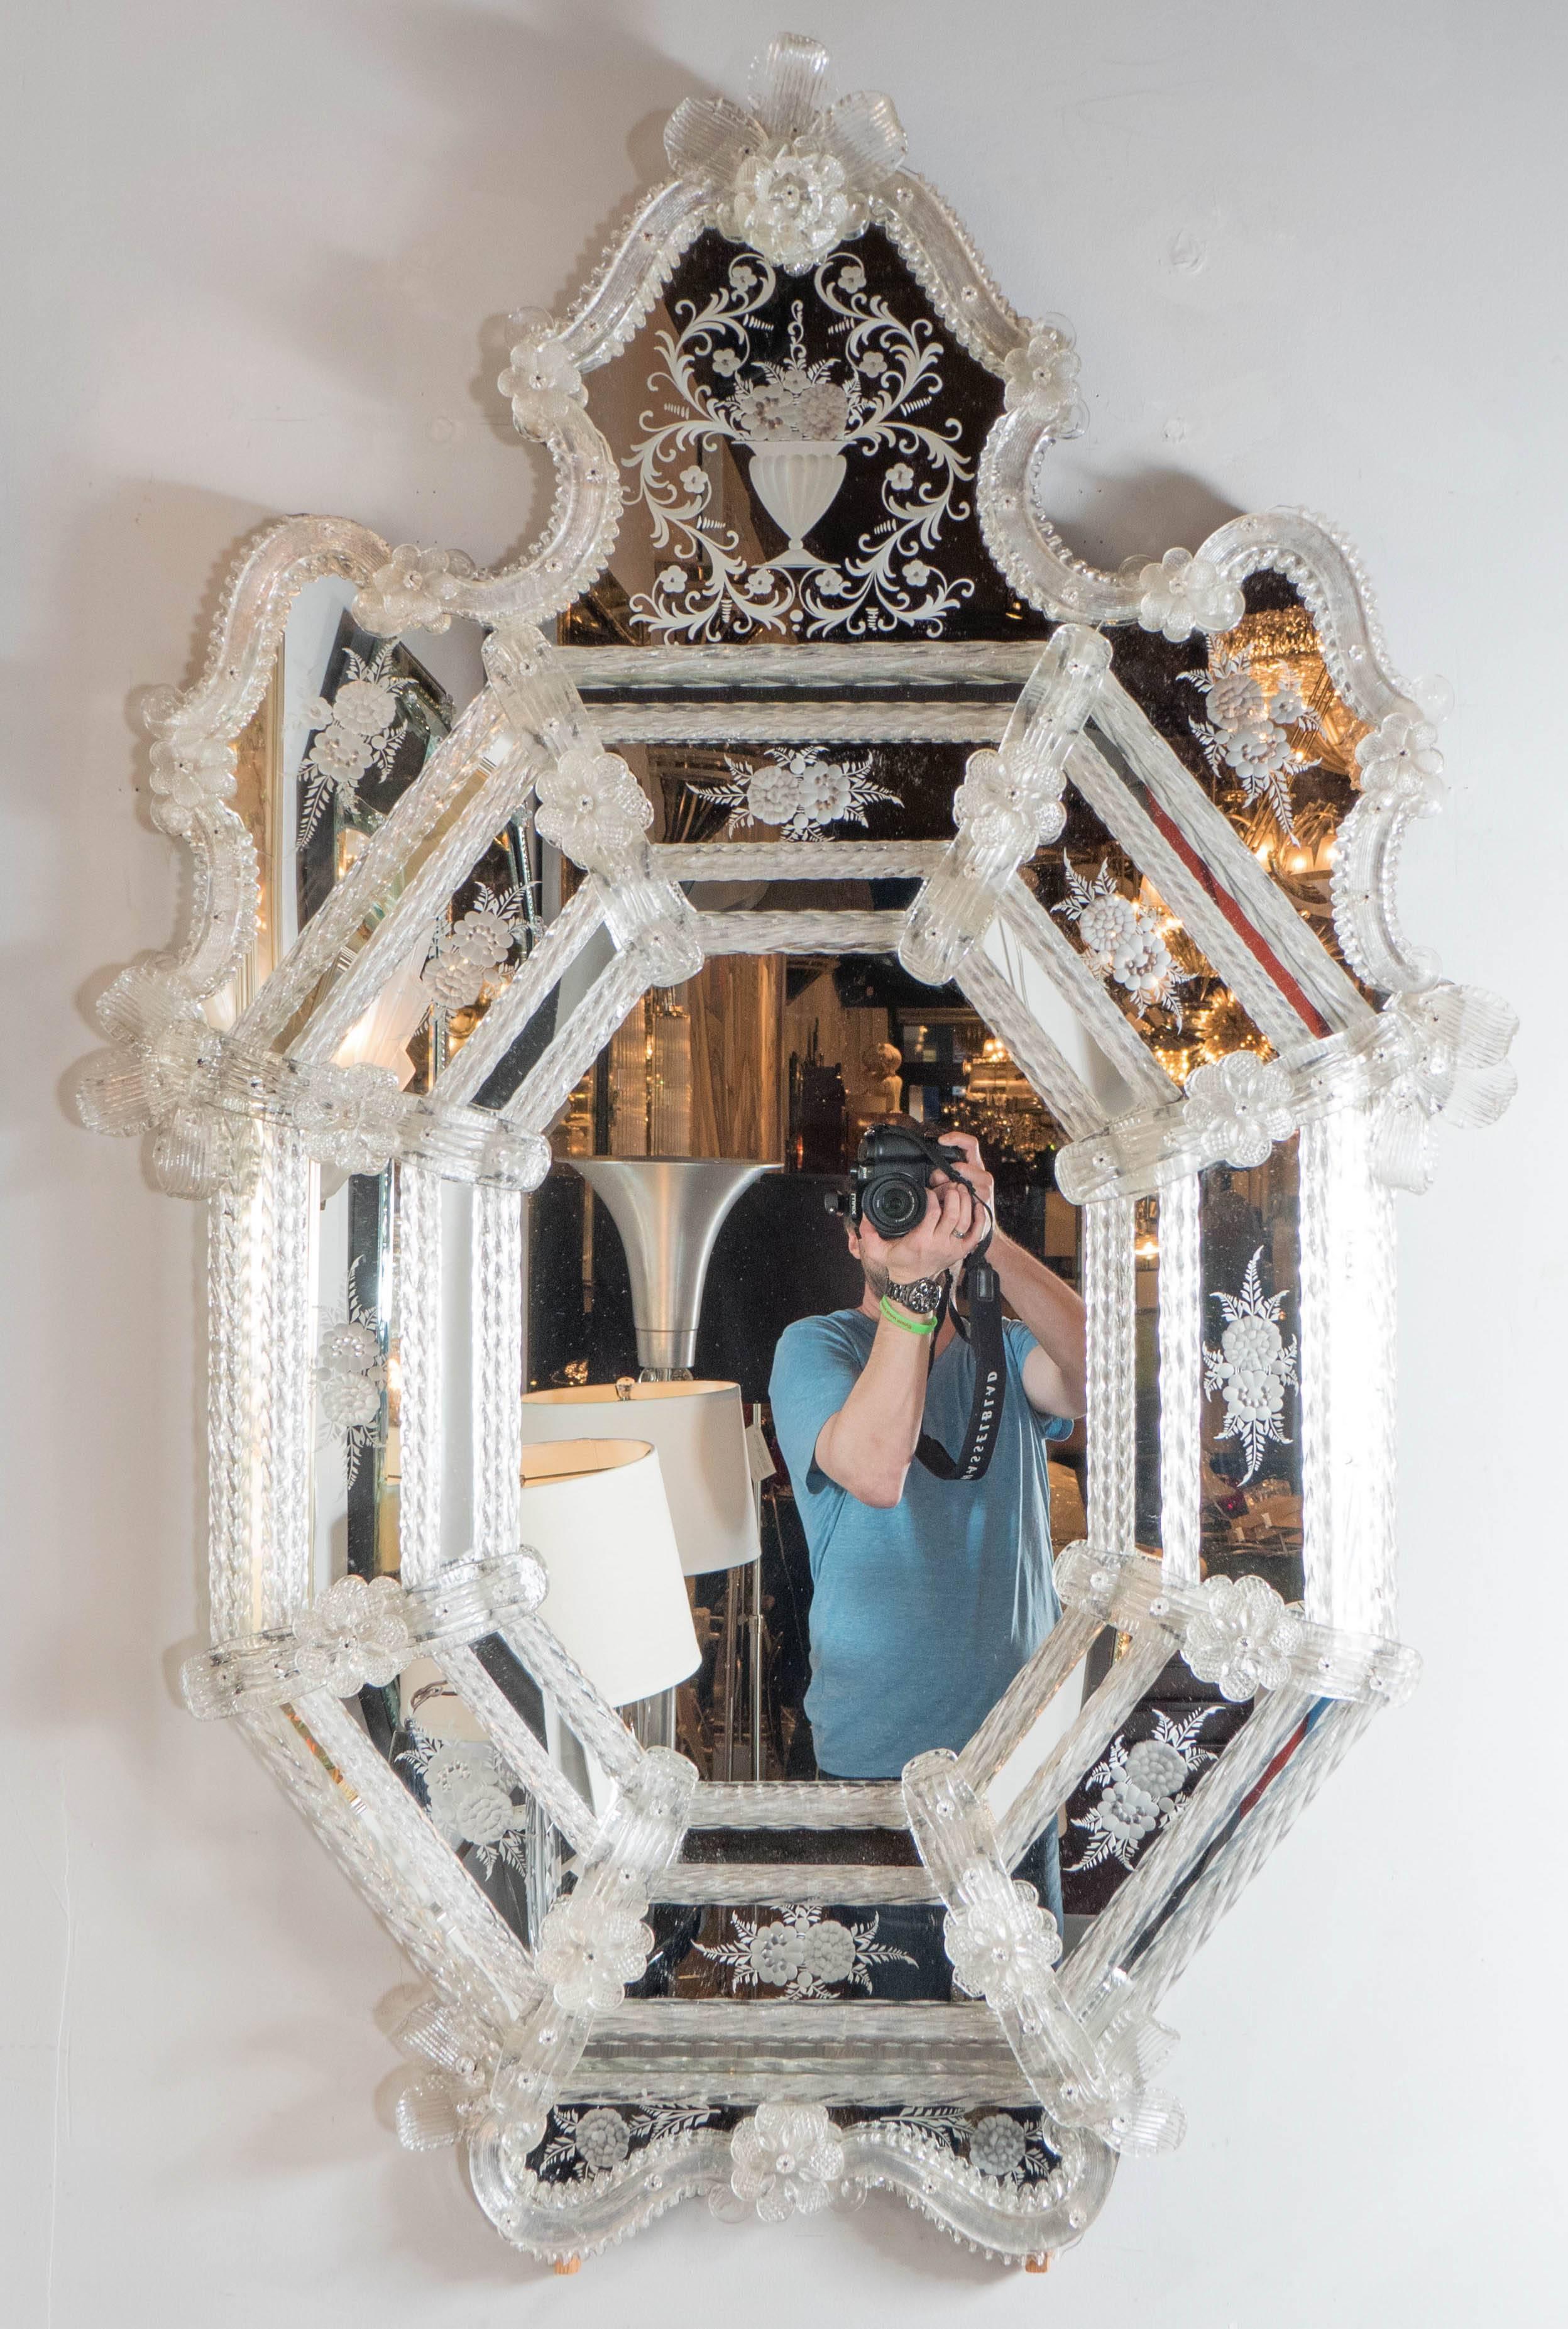 This exquisite Mid-Century Murano Venetian mirror features a crest form with scroll and reverse etched detailing throughout the borders. The mirror consists of a series of sections separated by rows of glass rods with a twist design and floral and